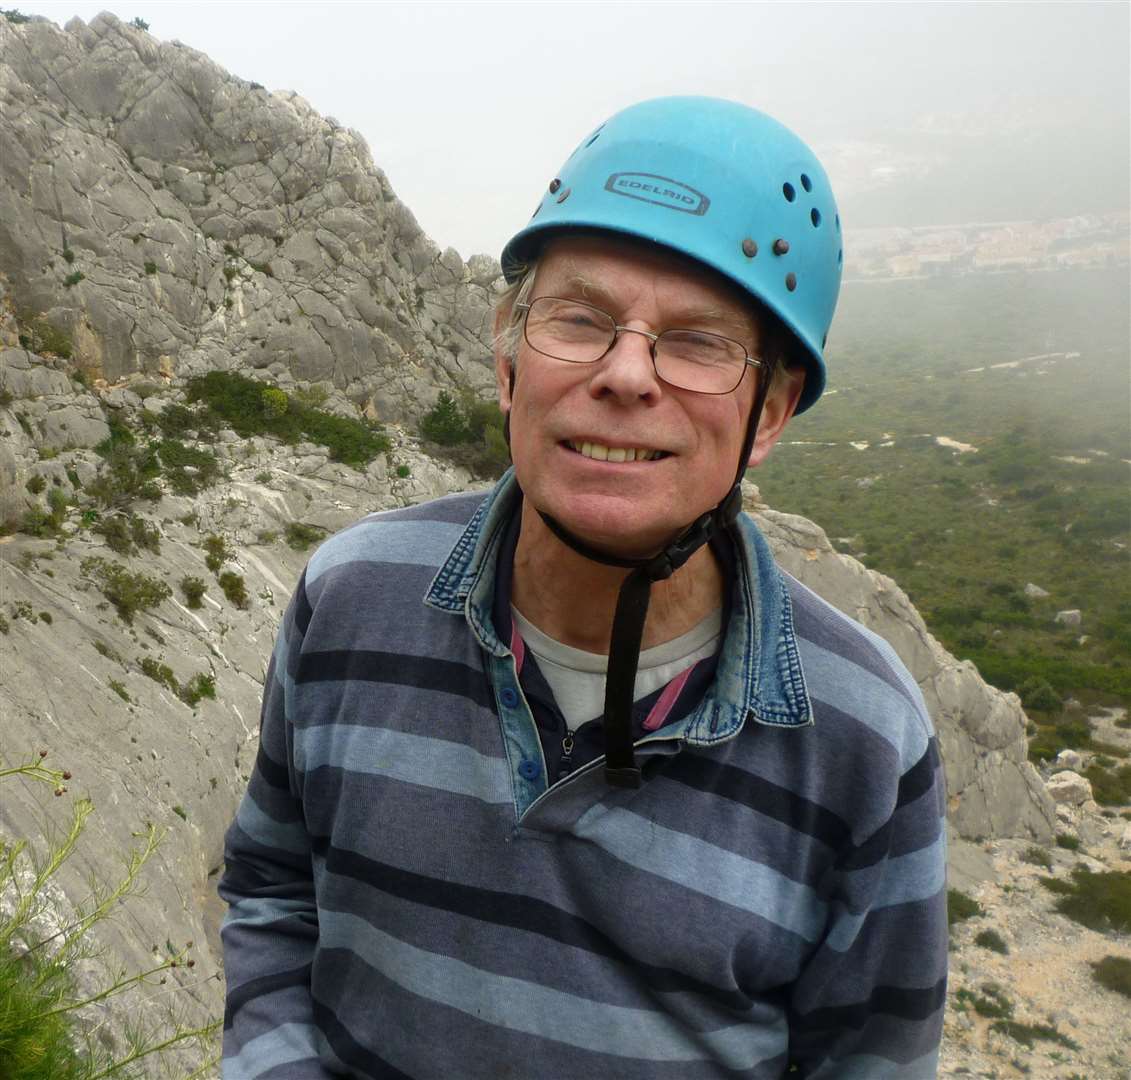 Malcolm Phelps has been rock climbing across the world for more than 50 years